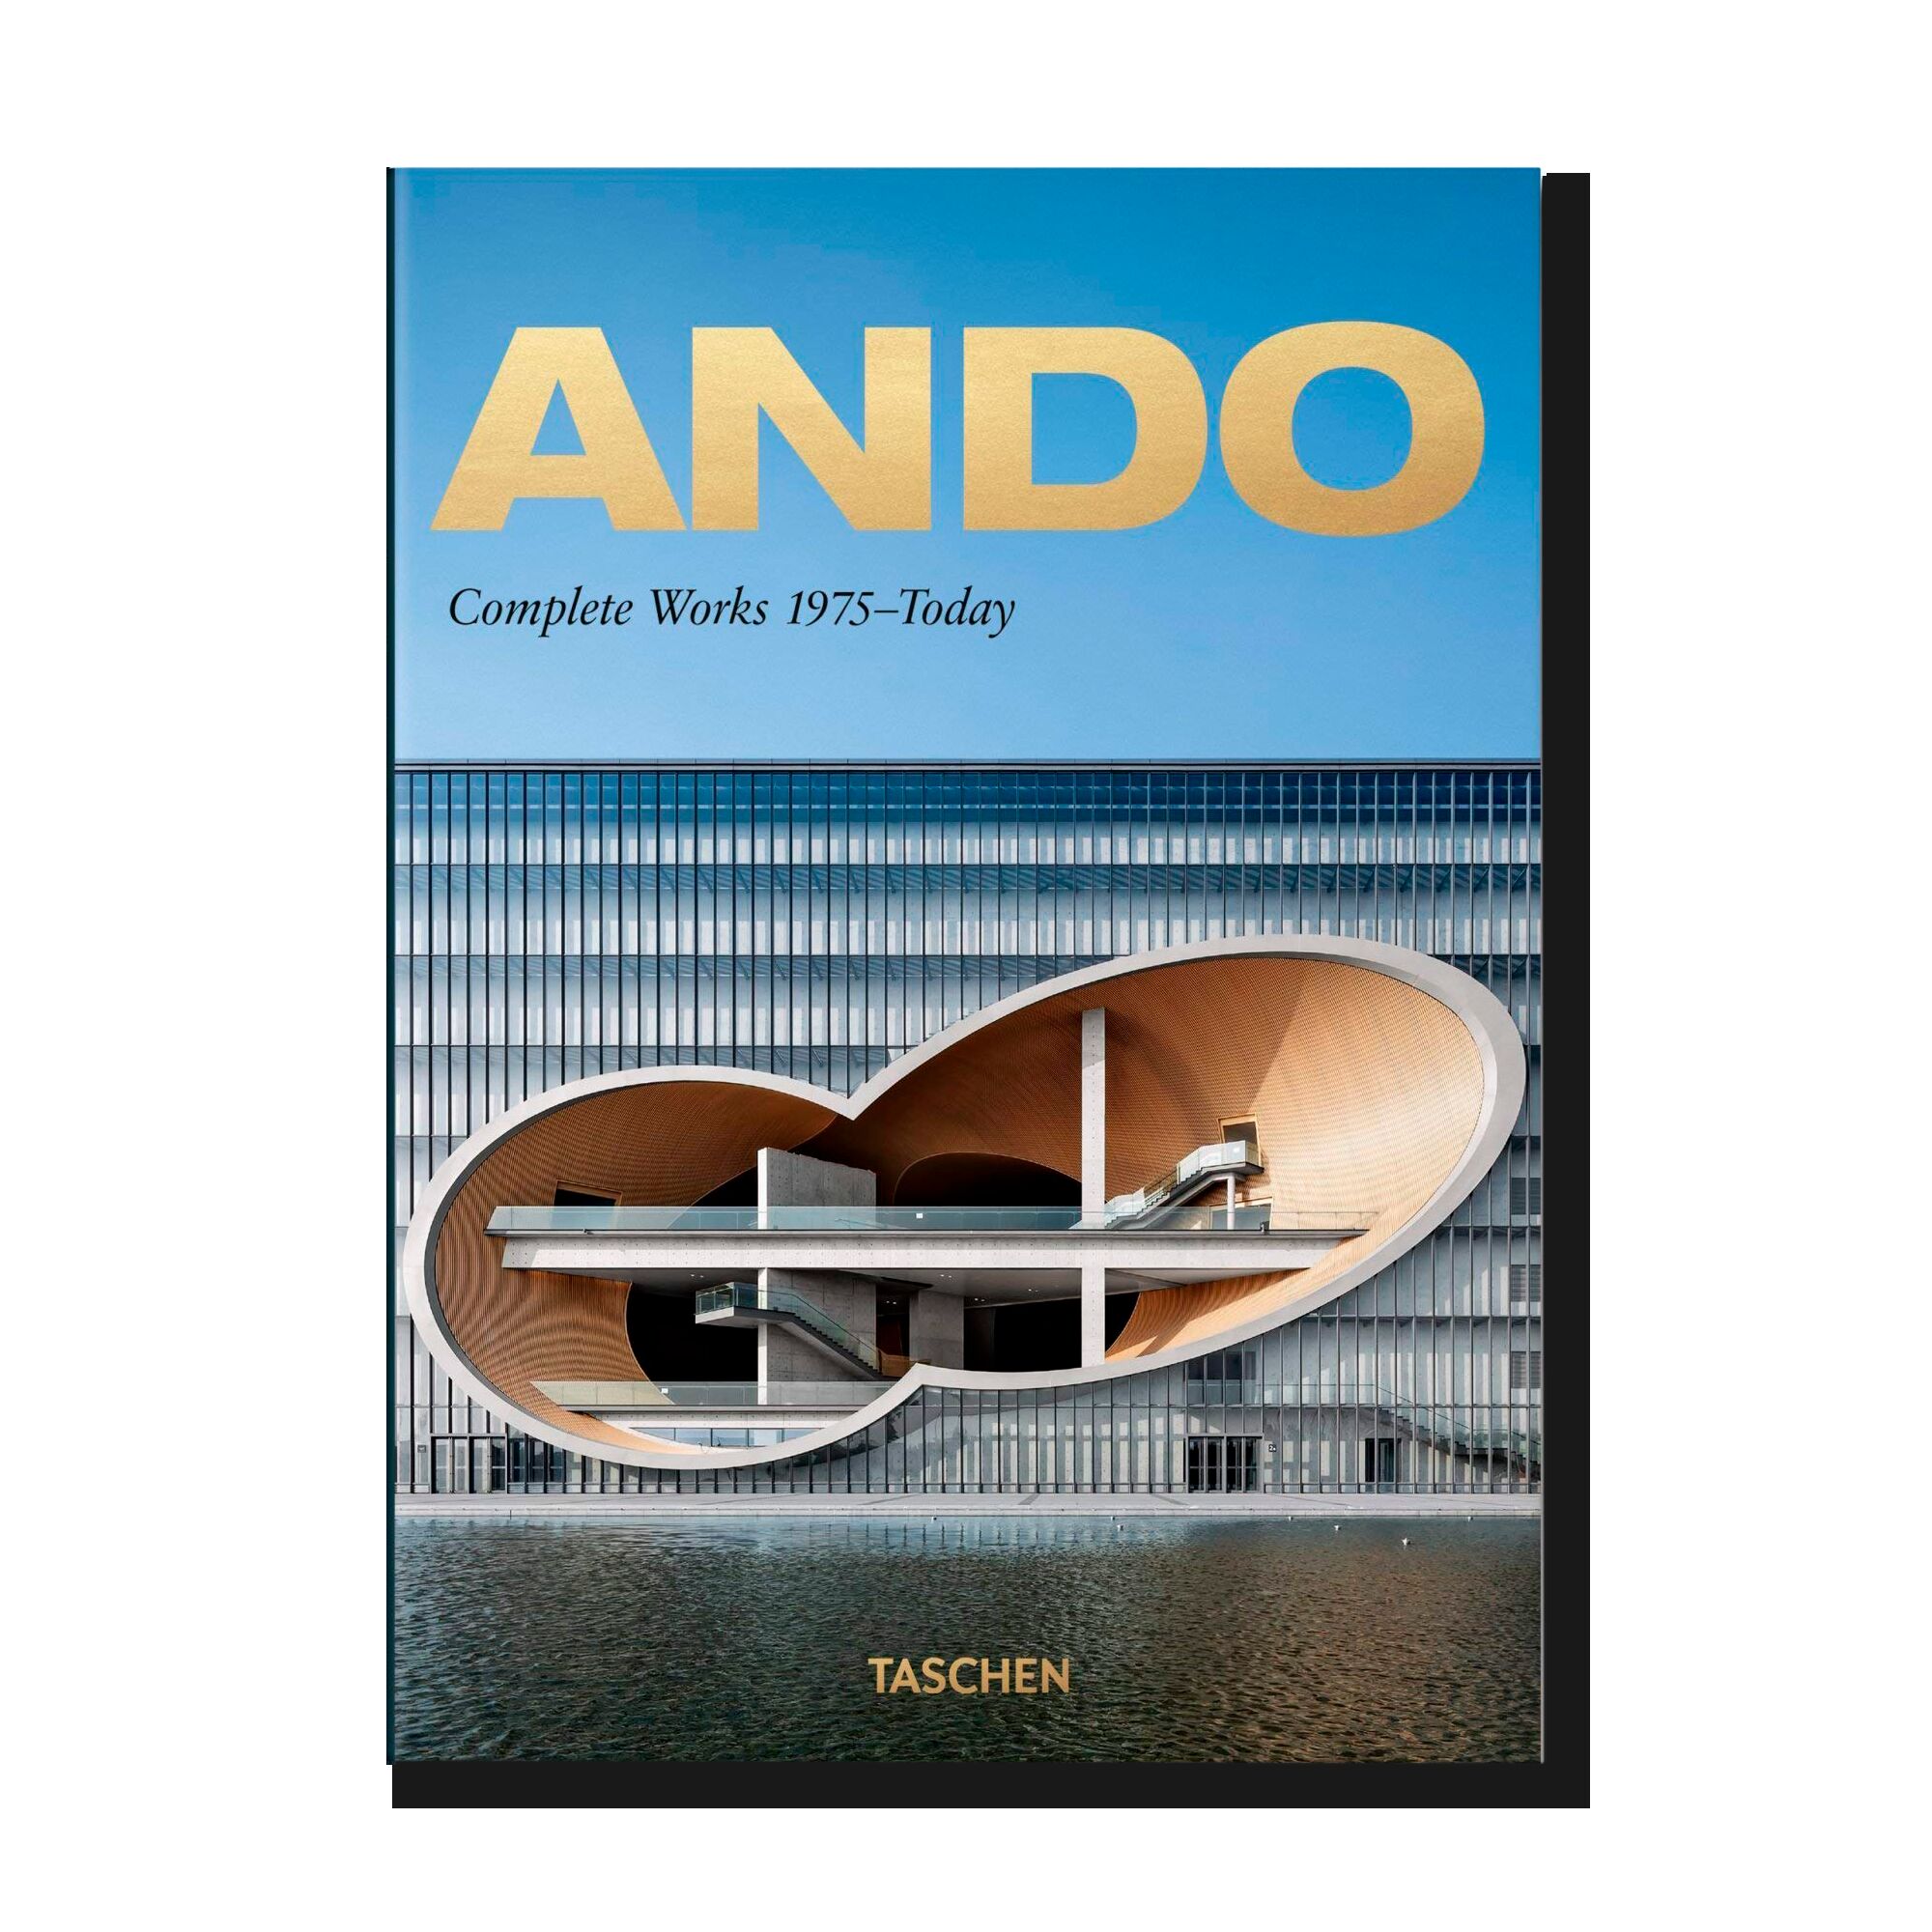 Ando. Complete Works 1975-Today